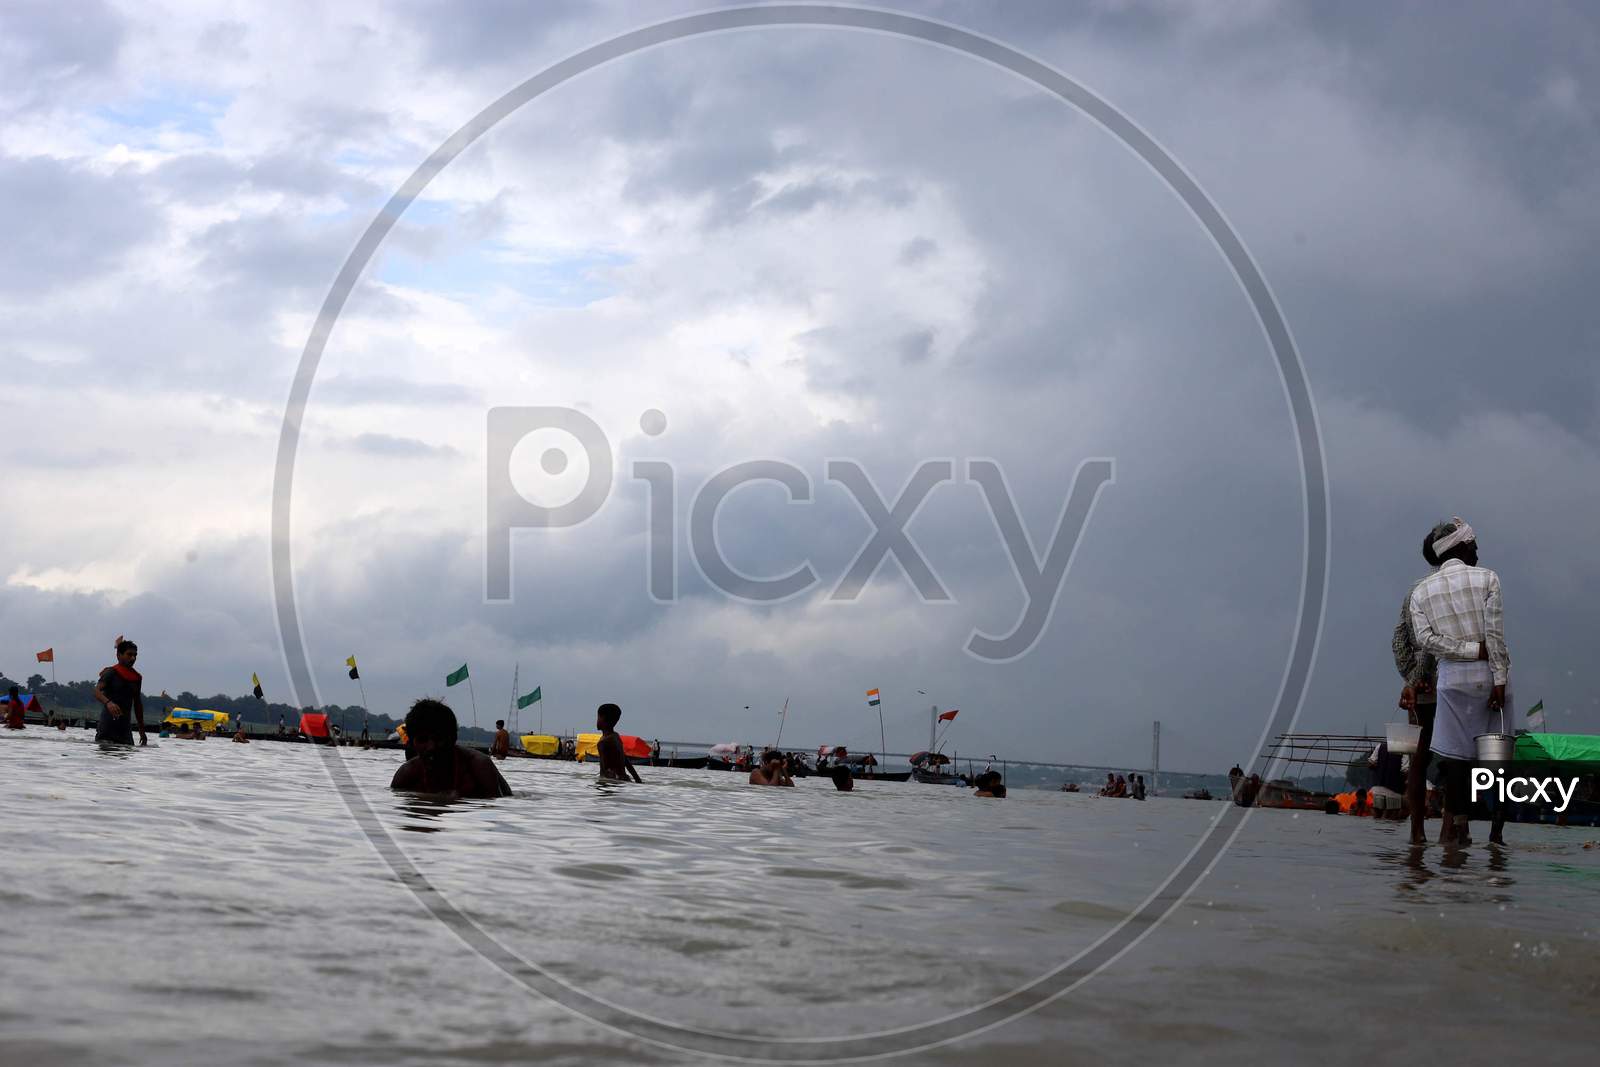 People take a dip in River Ganga which saw an increase in its water level due to heavy rainfall in Prayagraj, Uttar Pradesh on July 07, 2020